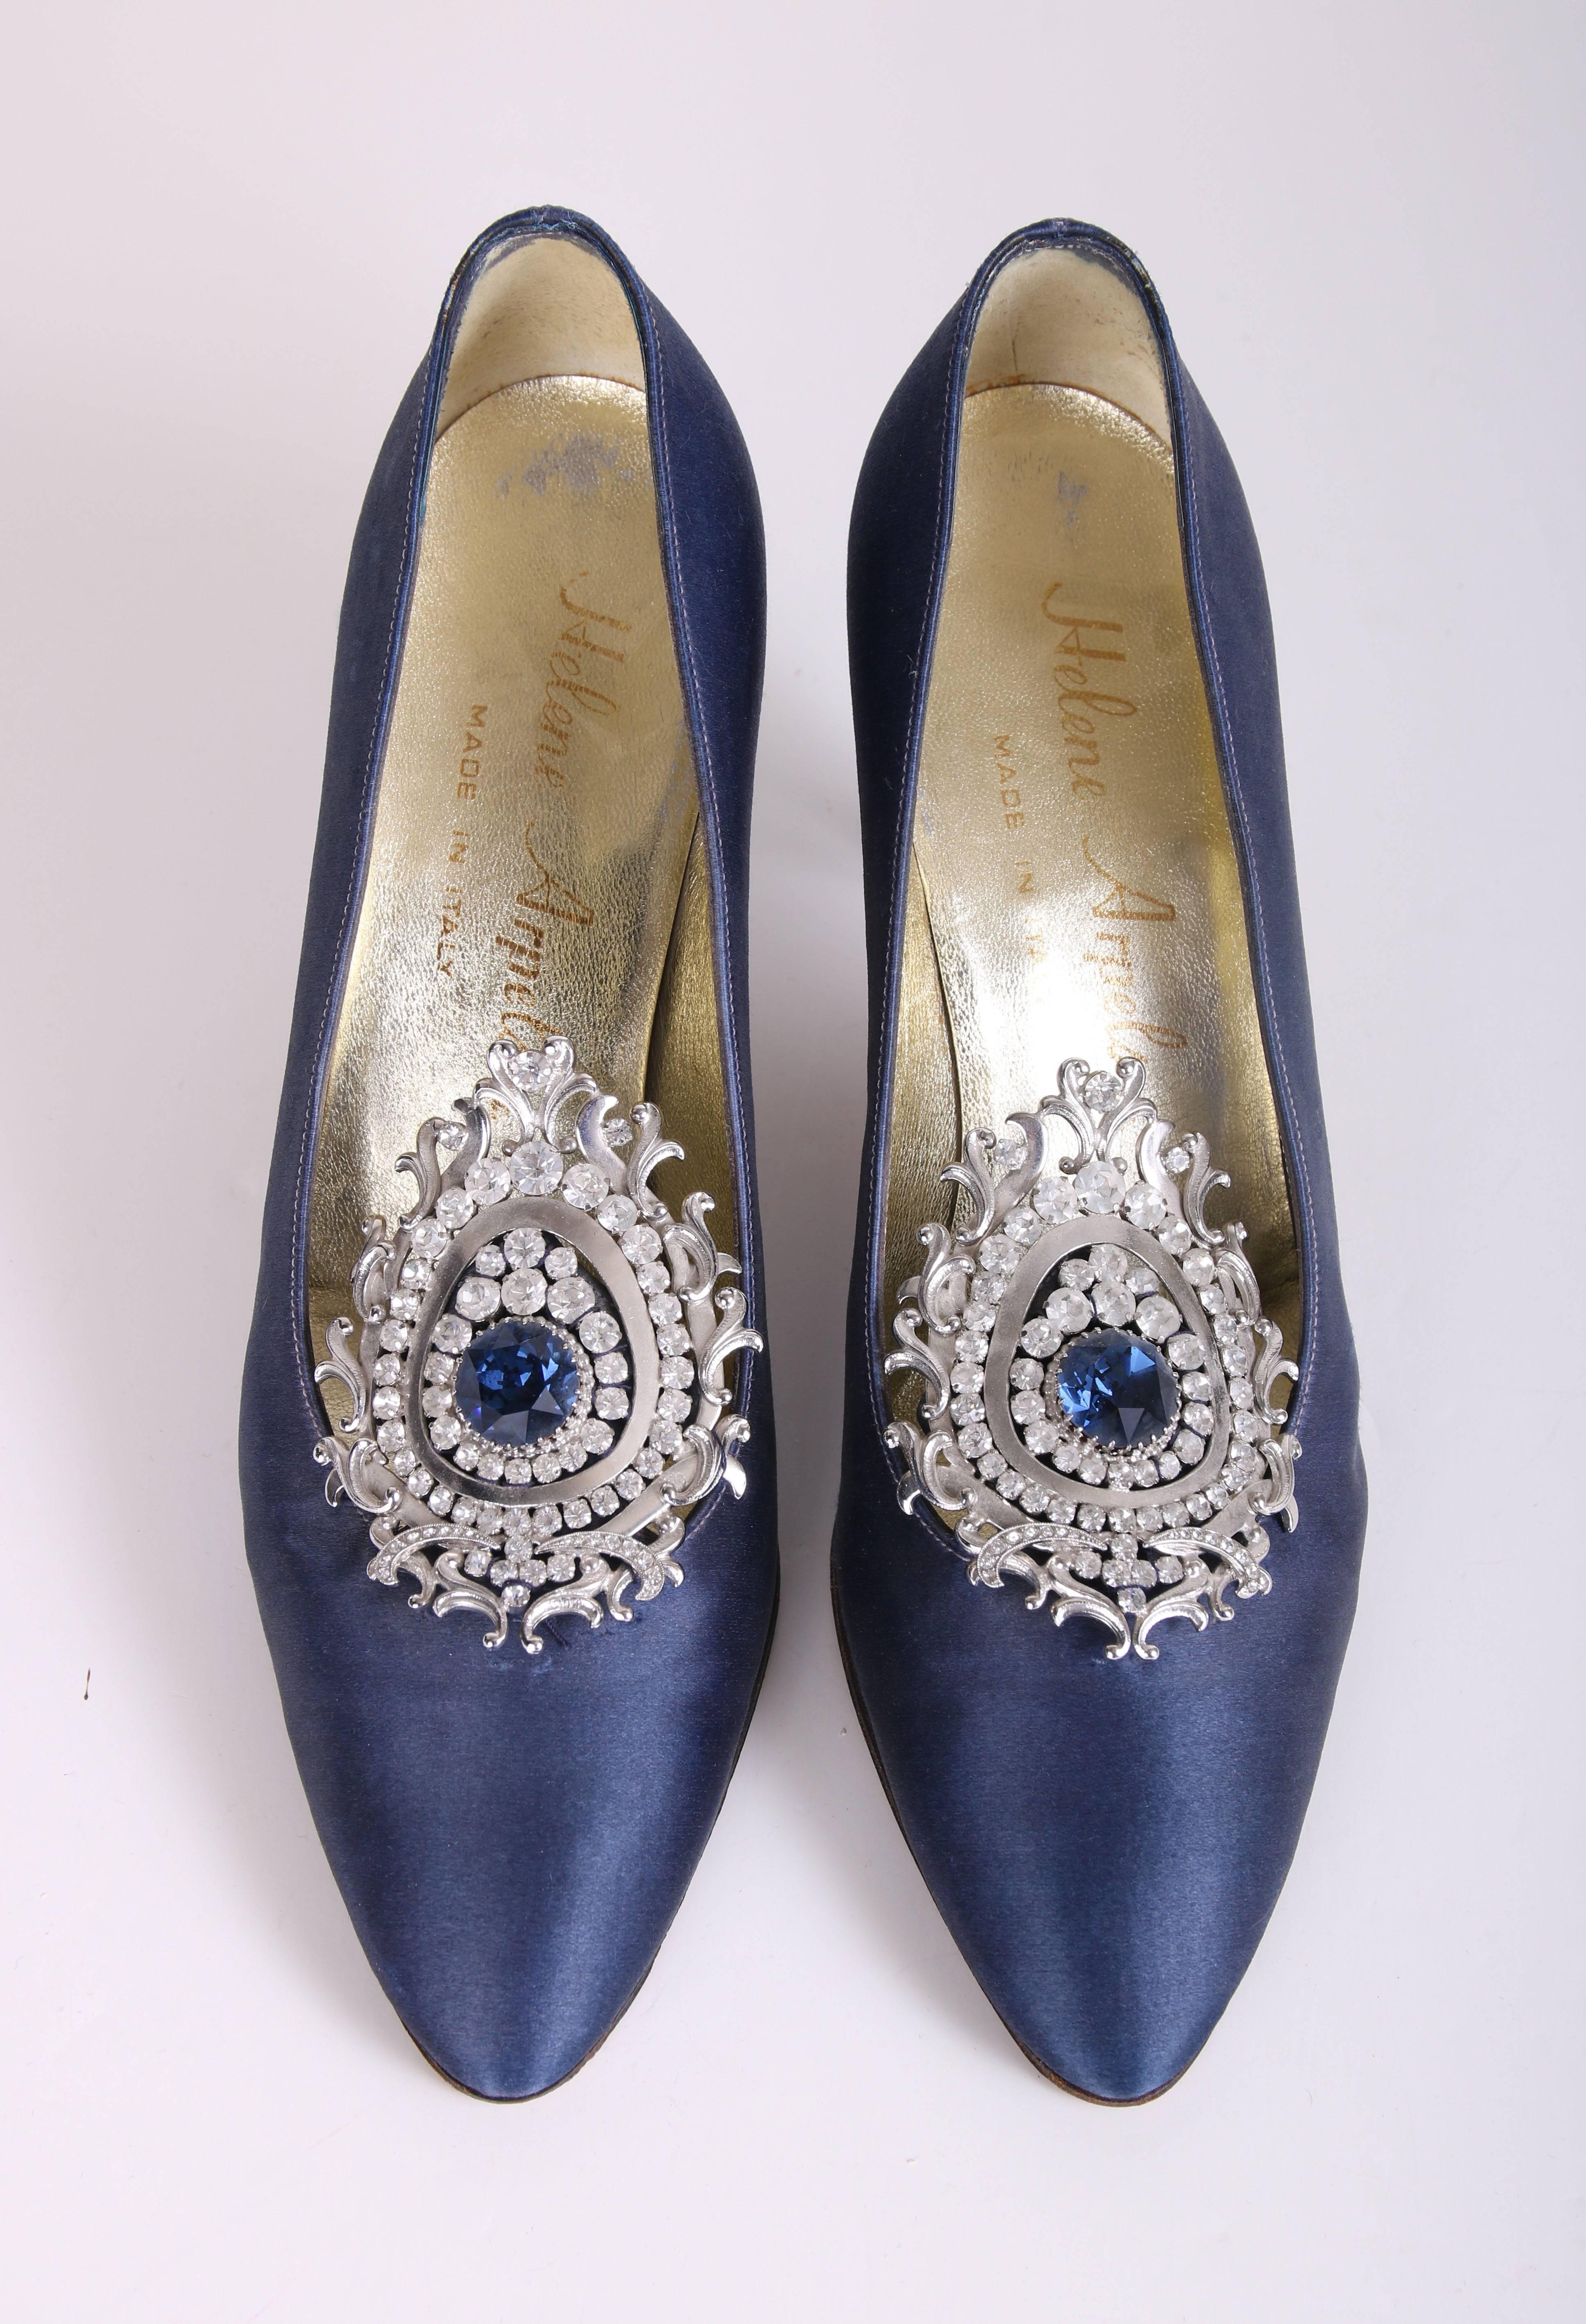 Vintage Helene Arpels blue silk pumps with jeweled design at vamp. Helene Arpels logo at inner bottom. In excellent condition with some light wear at bottom of shoes. Size 7AA. 
